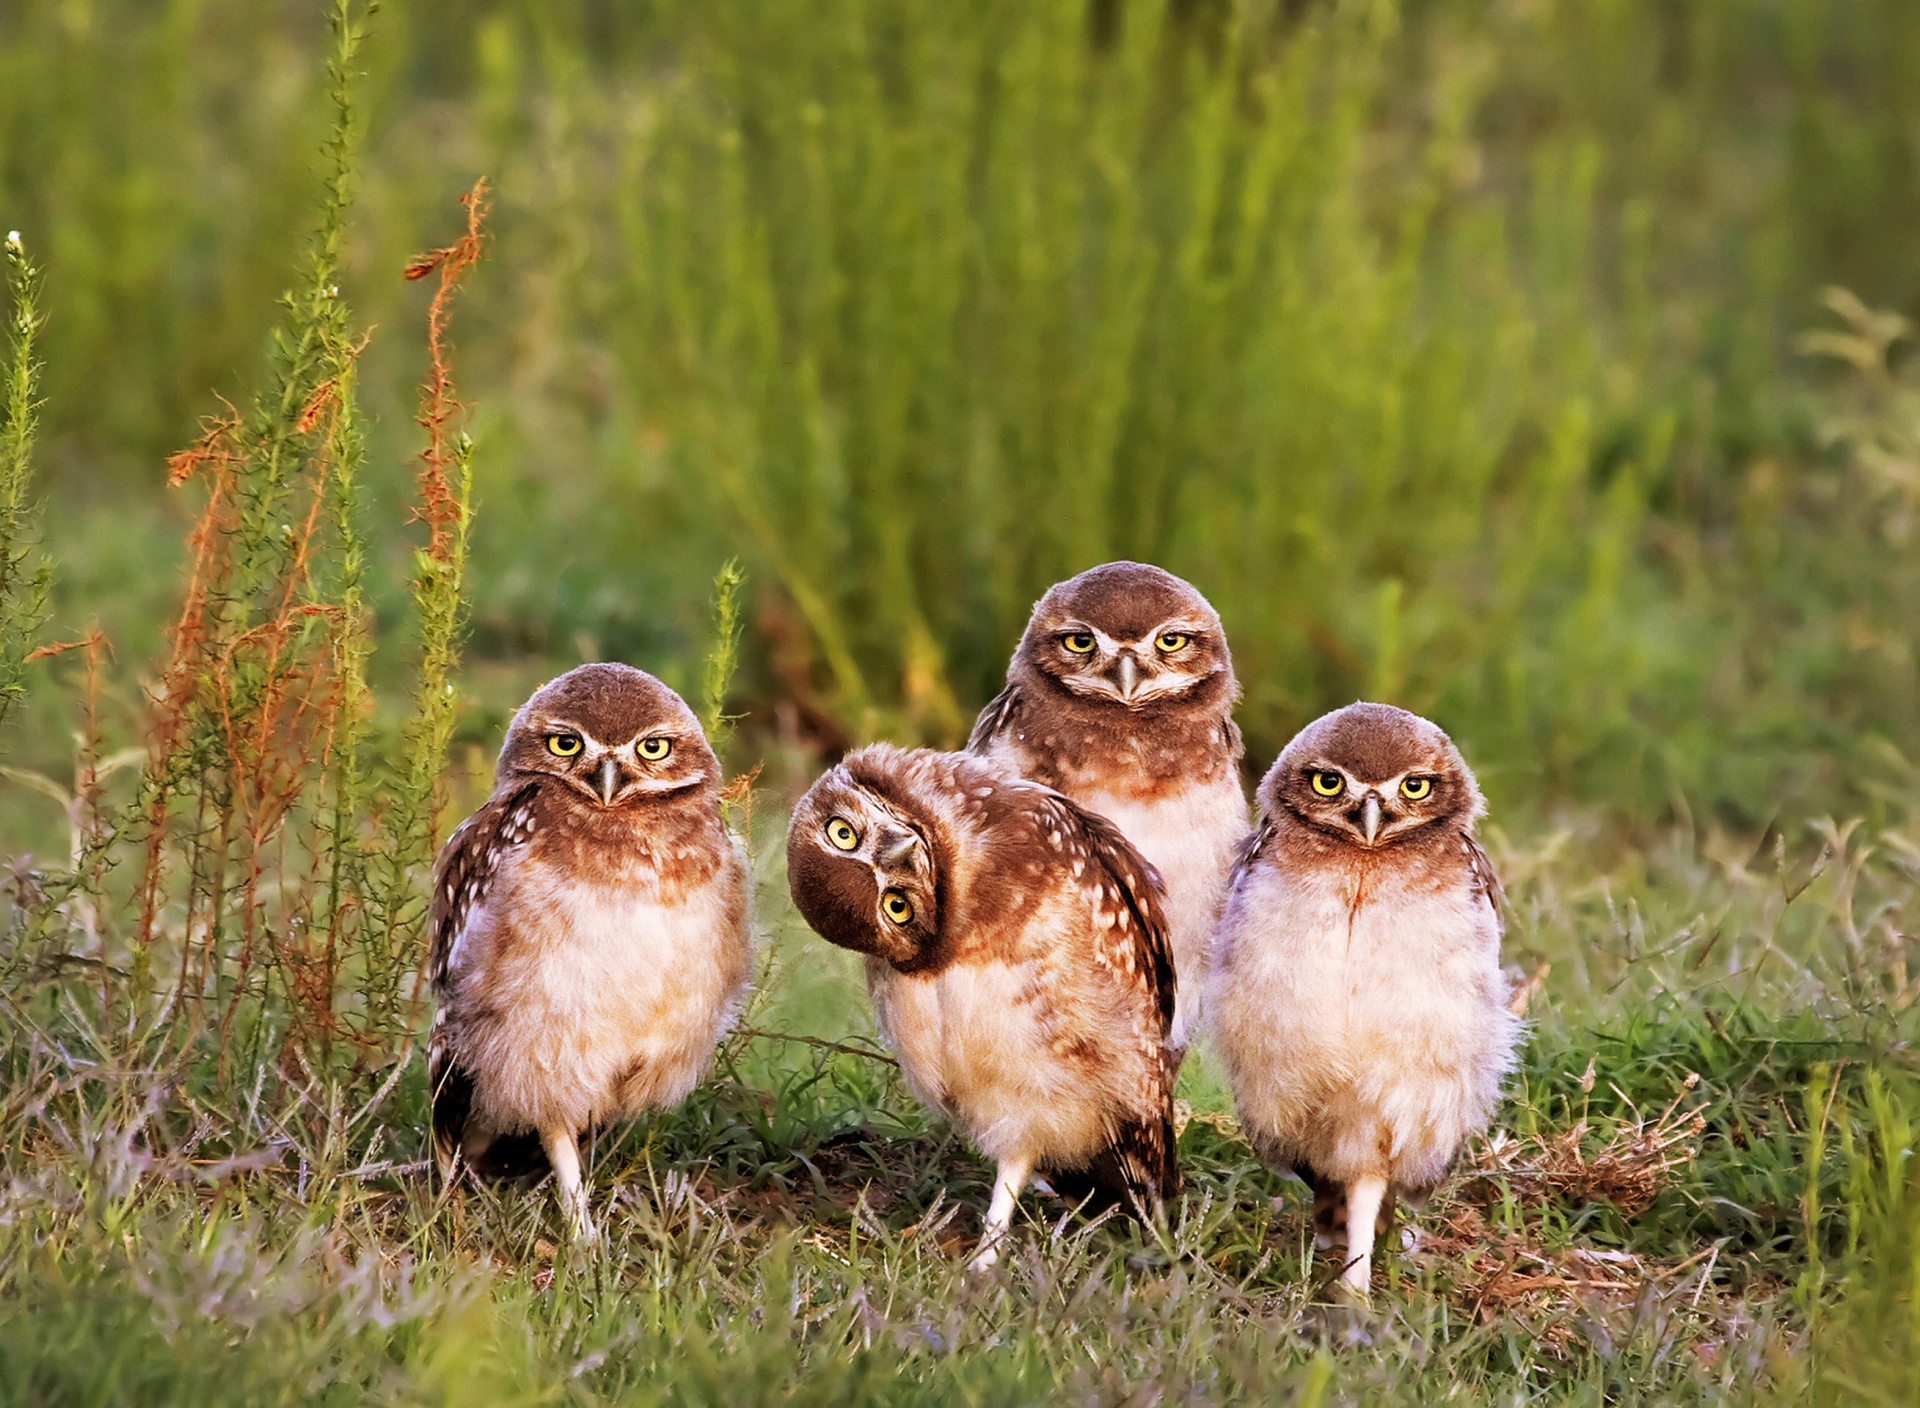 Morning with owls wallpaper 1920x1408